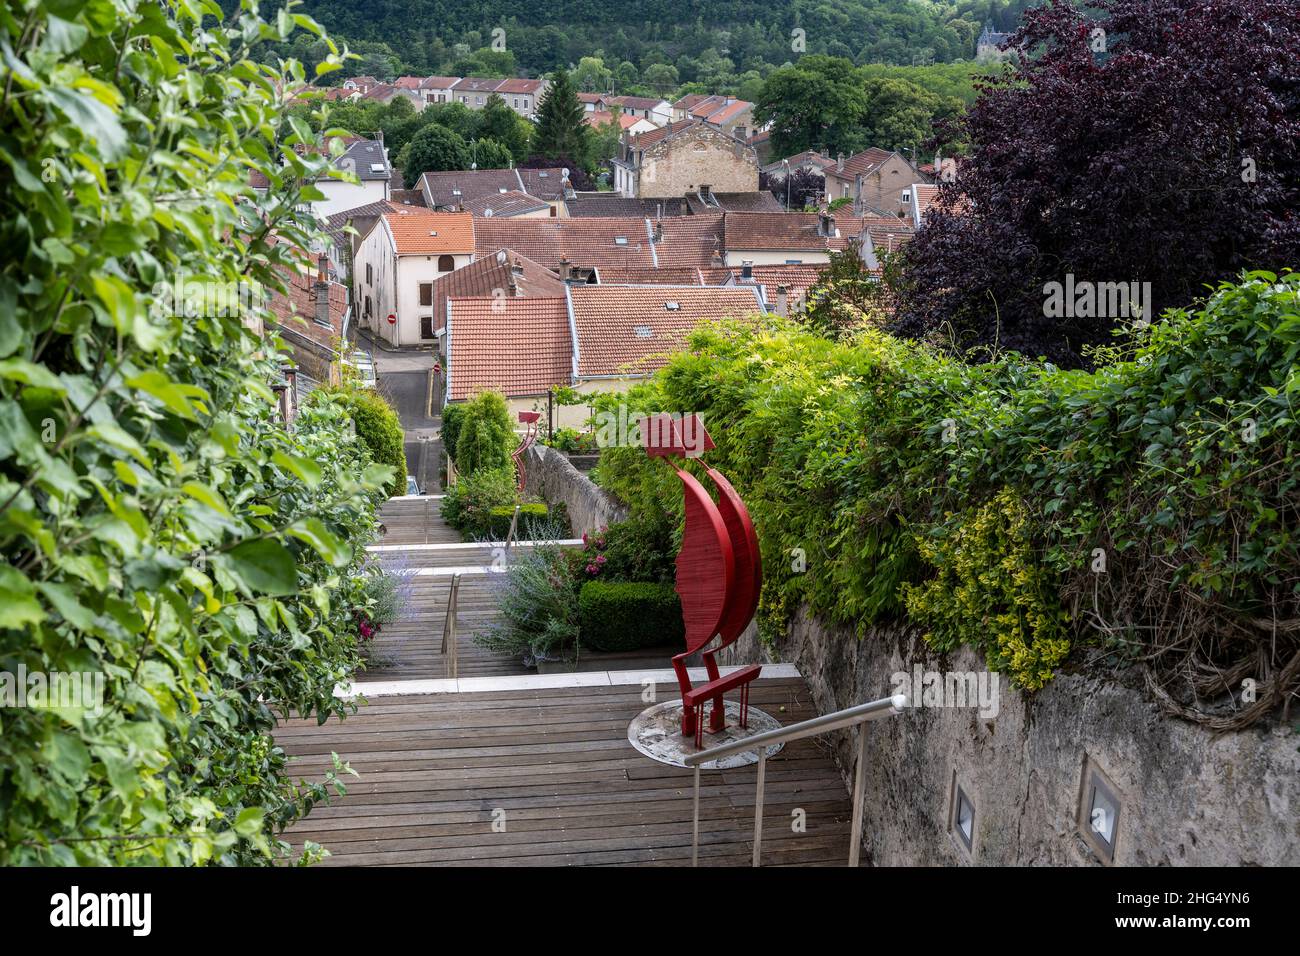 Liverdun, France - June 27, 2020: Street with stairs in Liverdun in France with old houses, forest and art on the stairs. Stock Photo